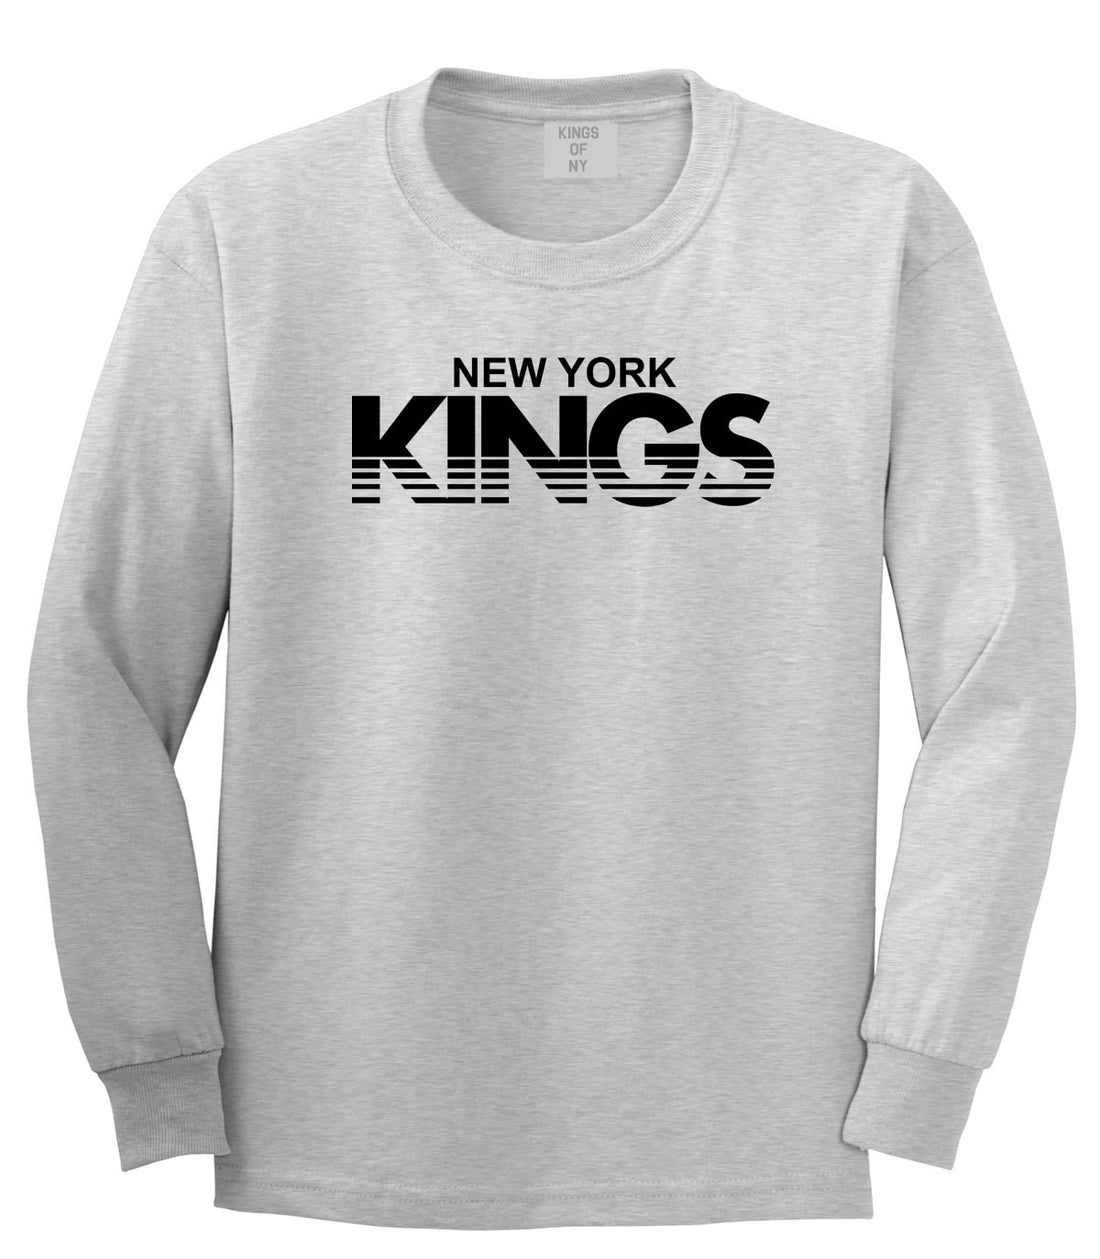 New York Kings Racing Style Boys Kids Long Sleeve T-Shirt in Grey by Kings Of NY